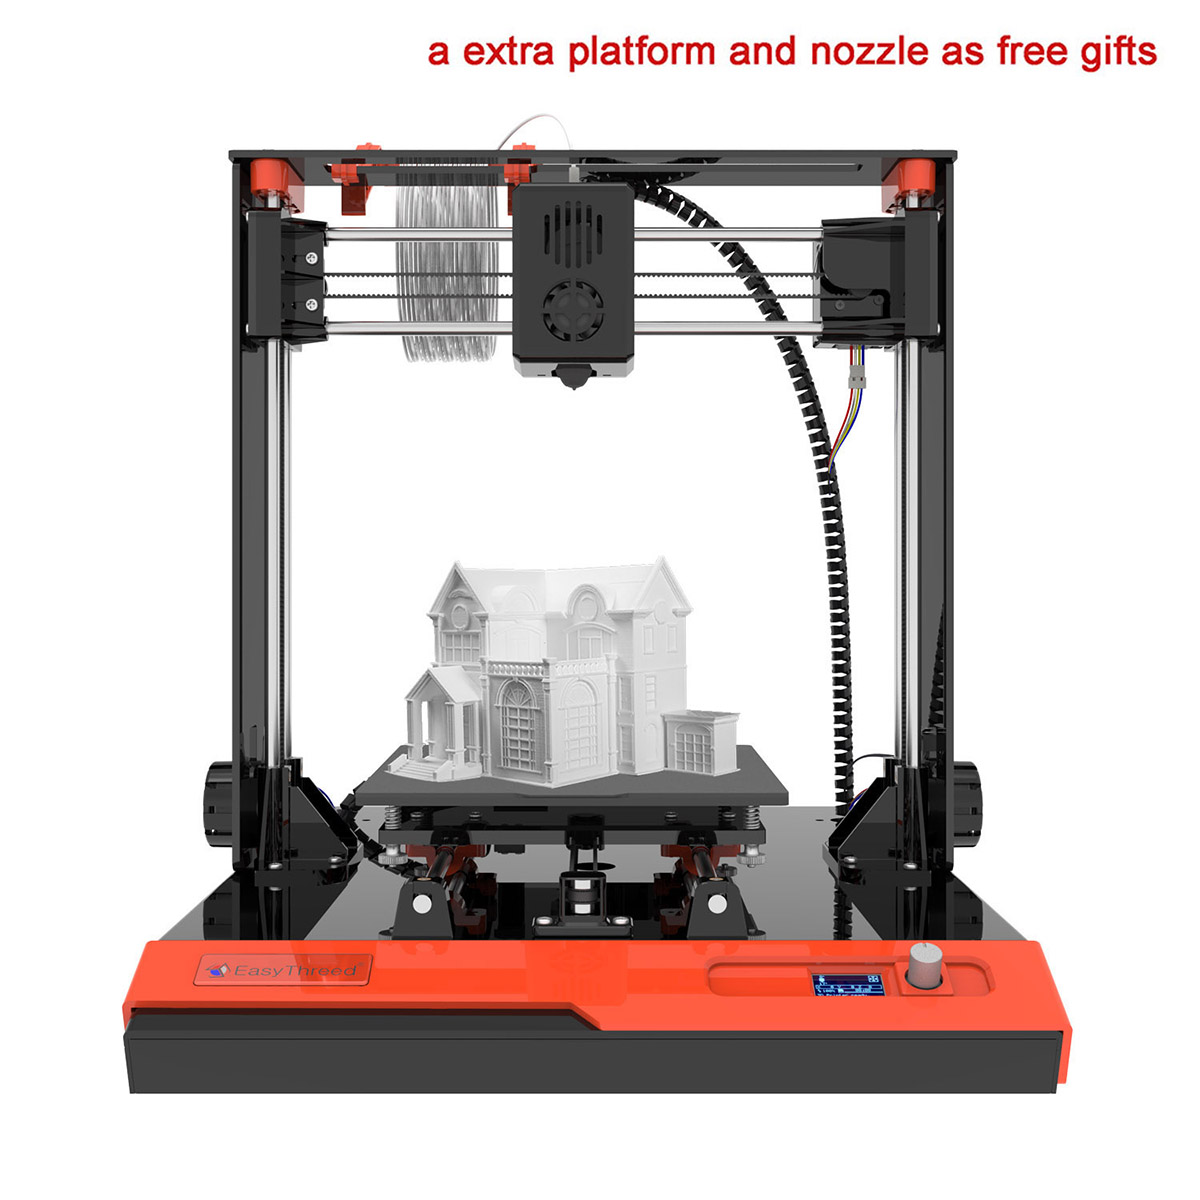 Easythreed K4 Mini 3D Printer for Household Education & Students 150*150*150mm Printing Size with hotbed with 1.75mm 0.4mm Nozzle LCD screen control/CE Certificate